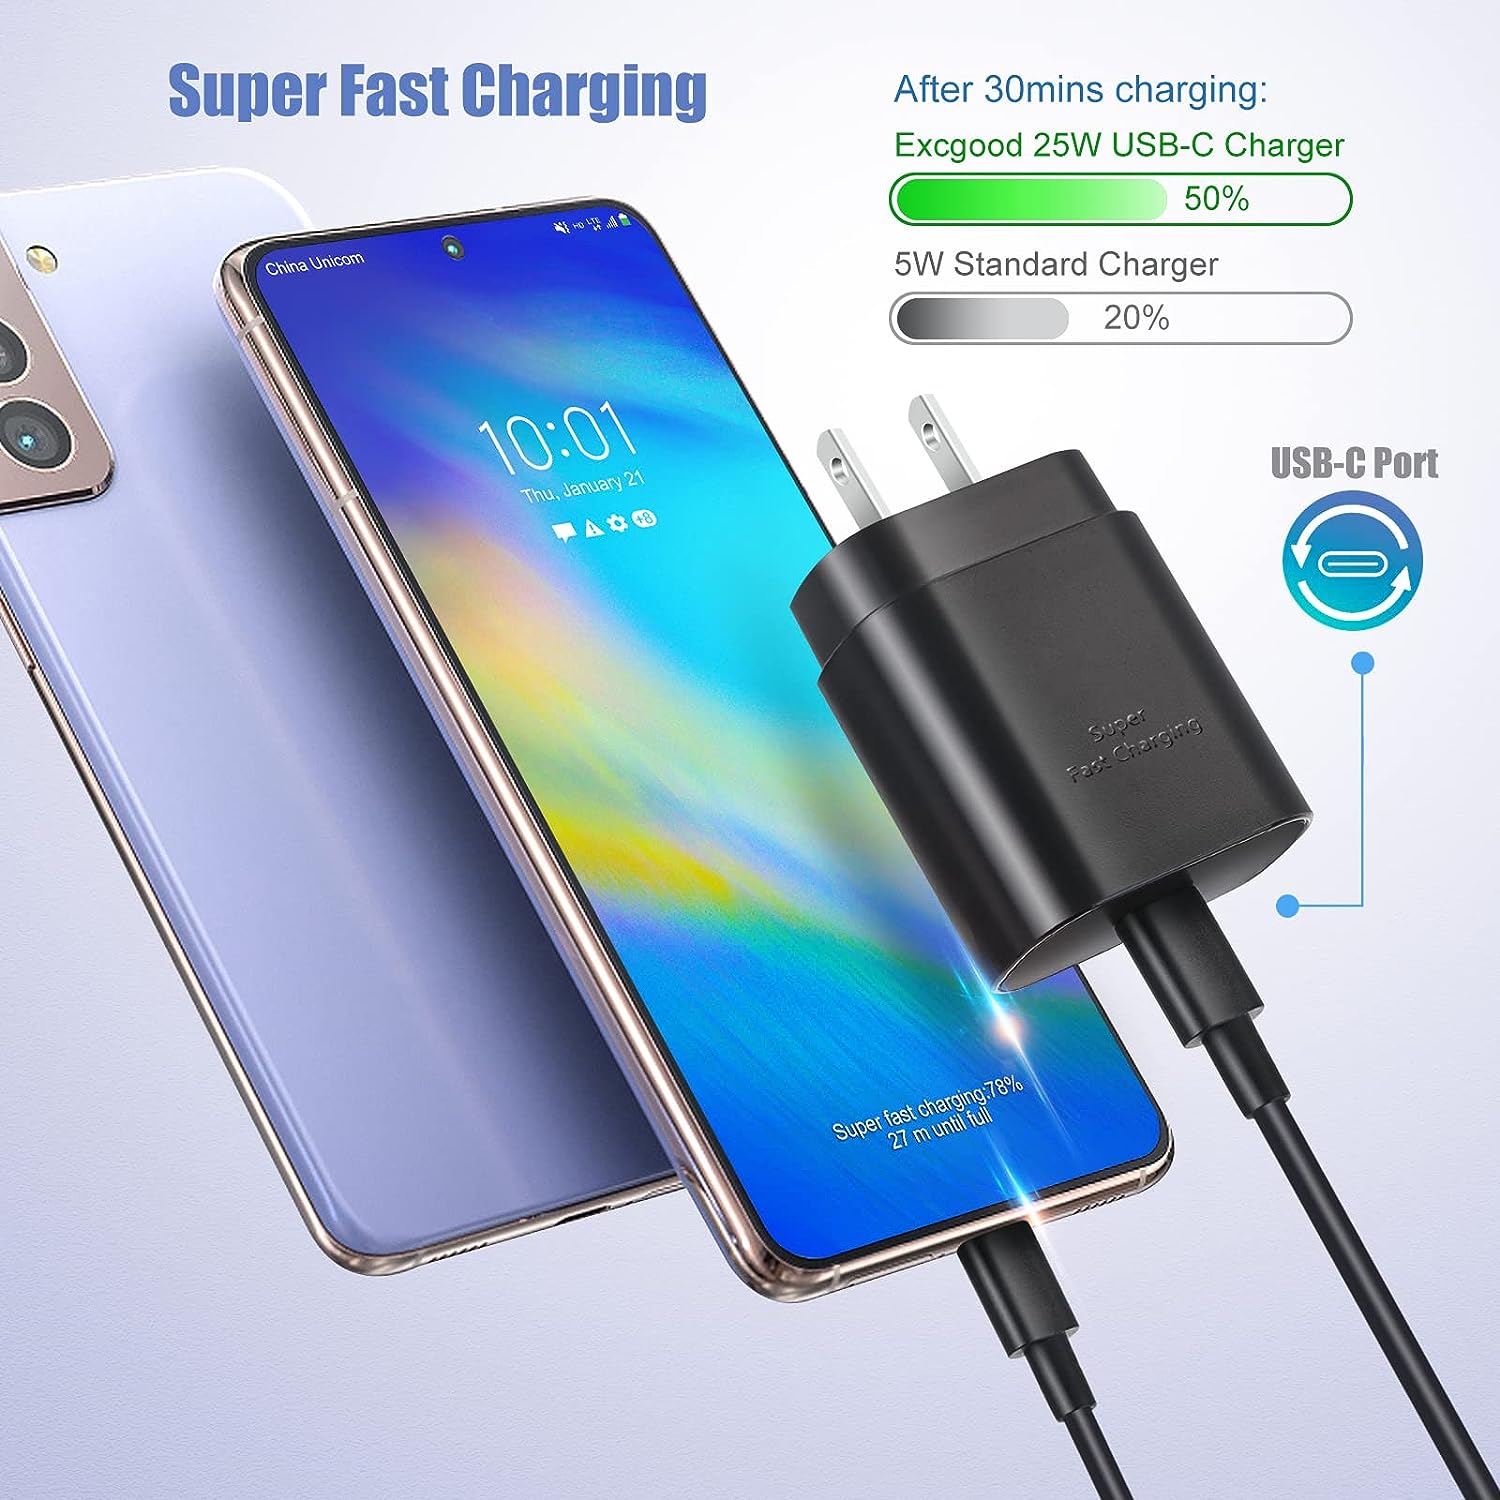 Welltech Super Fast Charging 25w Charger with Type-C to Type-C Cable